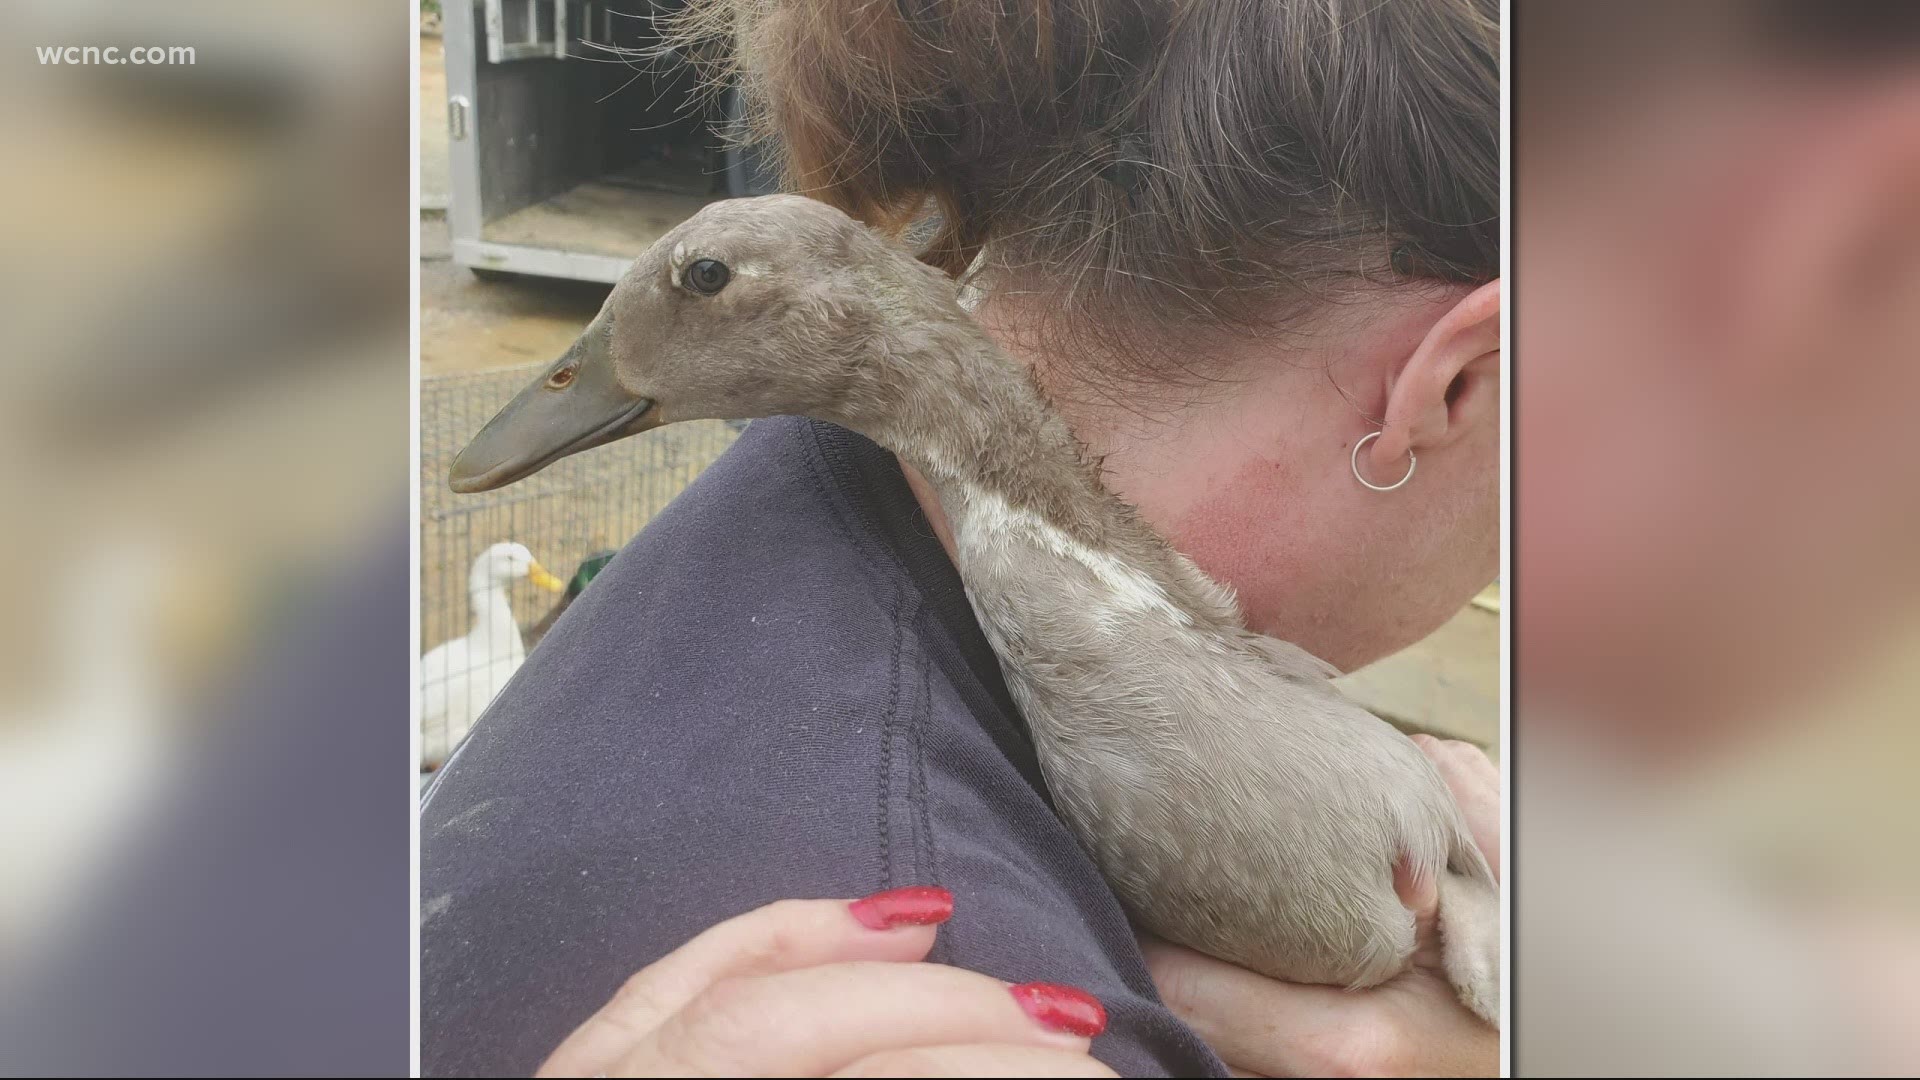 Dozens of ducks and geese, rescued from a Statesville Park after a series of disturbing animal abuse cases.